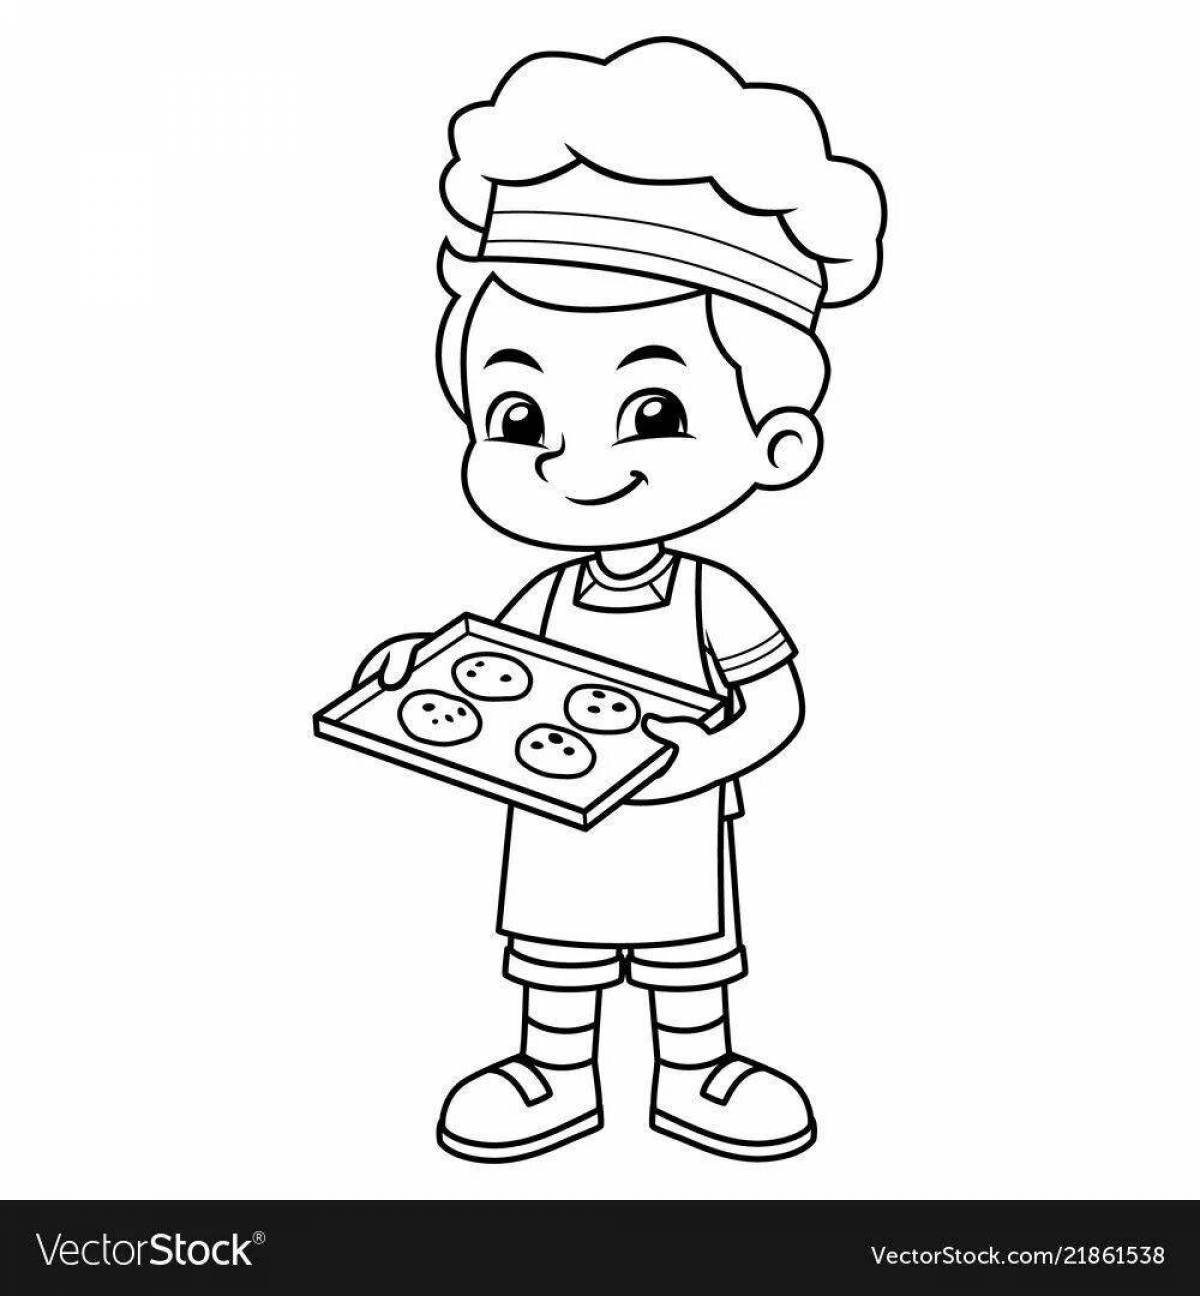 Coloring chef with bright colors